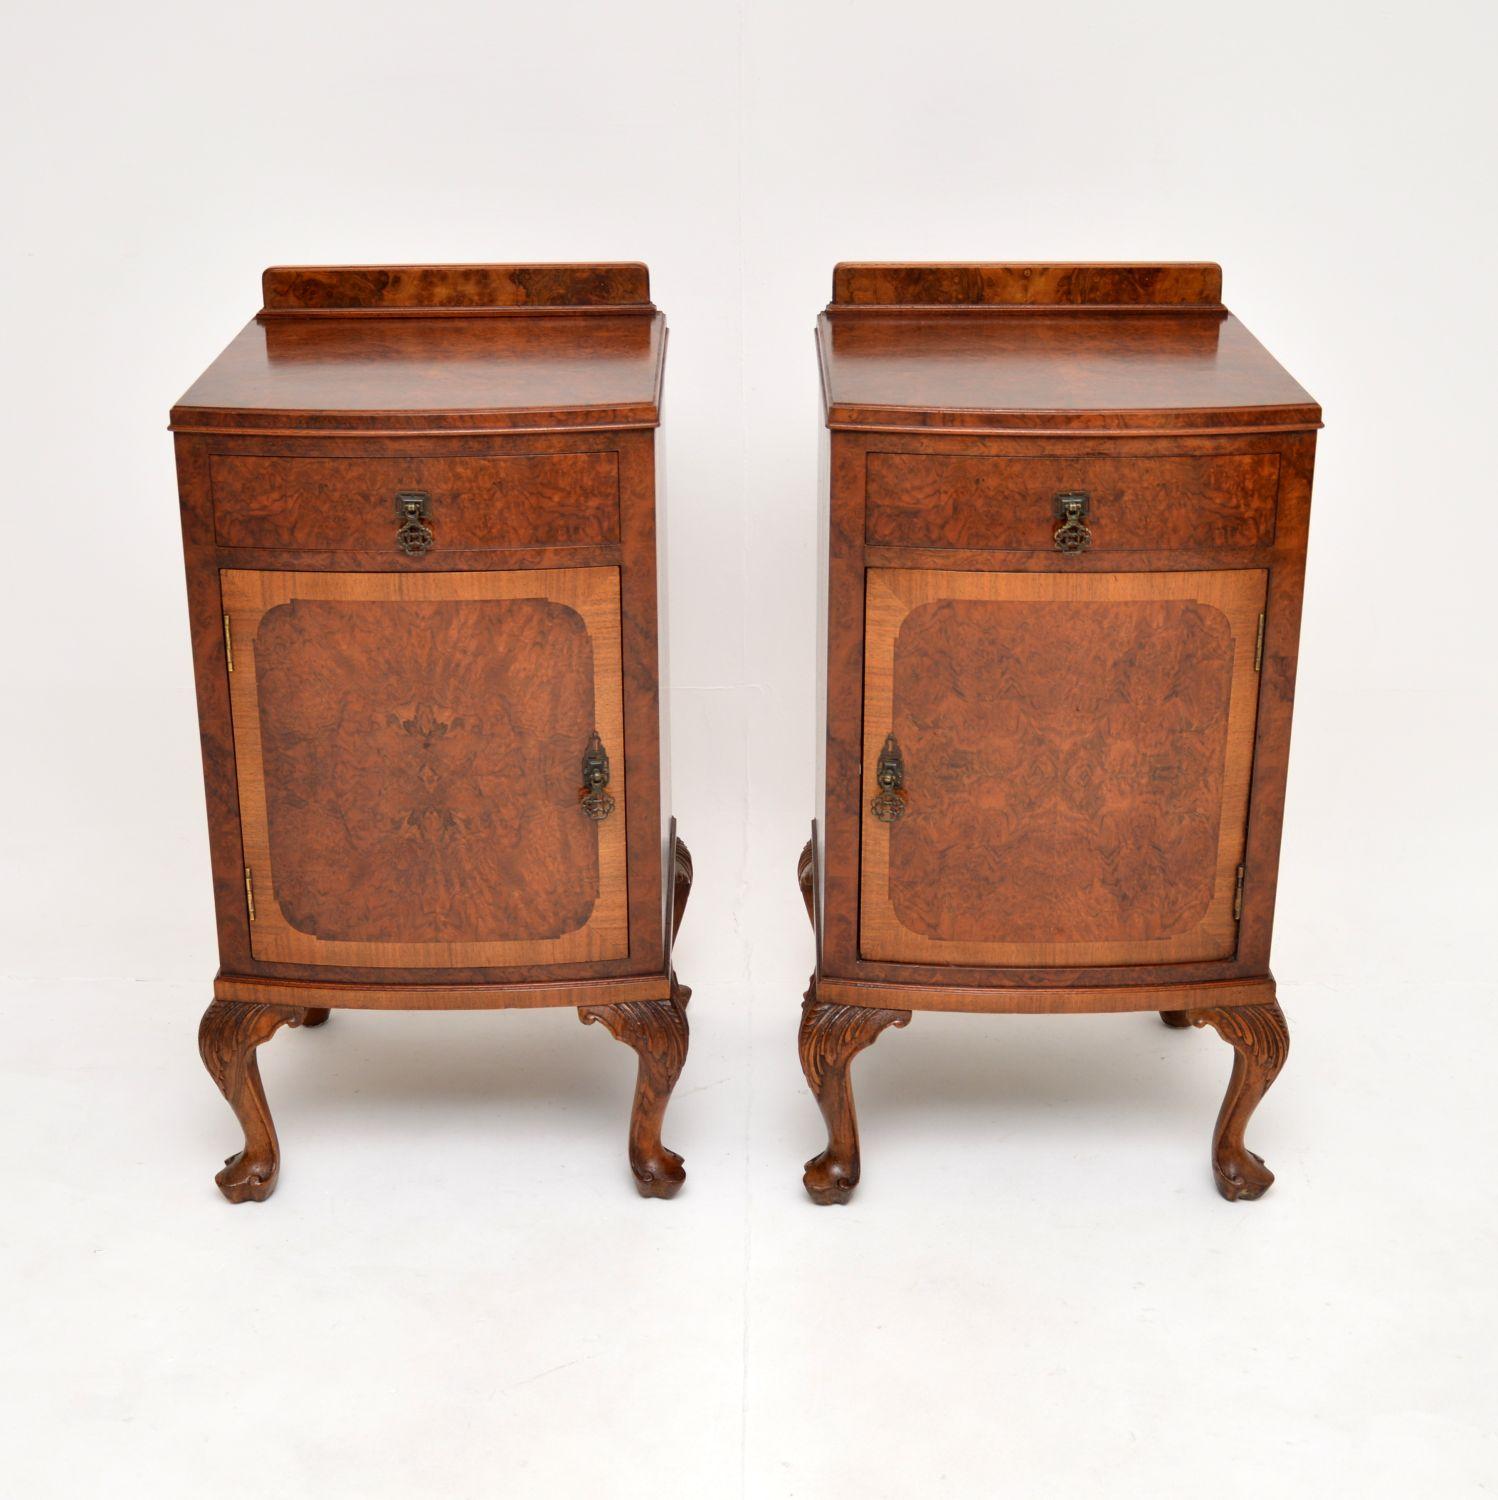 An outstanding pair of antique burr walnut bedside cabinets. They were made in England, they date from around the 1900-1920 period.

They are of magnificent quality and are a large, impressive size. There are stunning burr walnut grain patterns